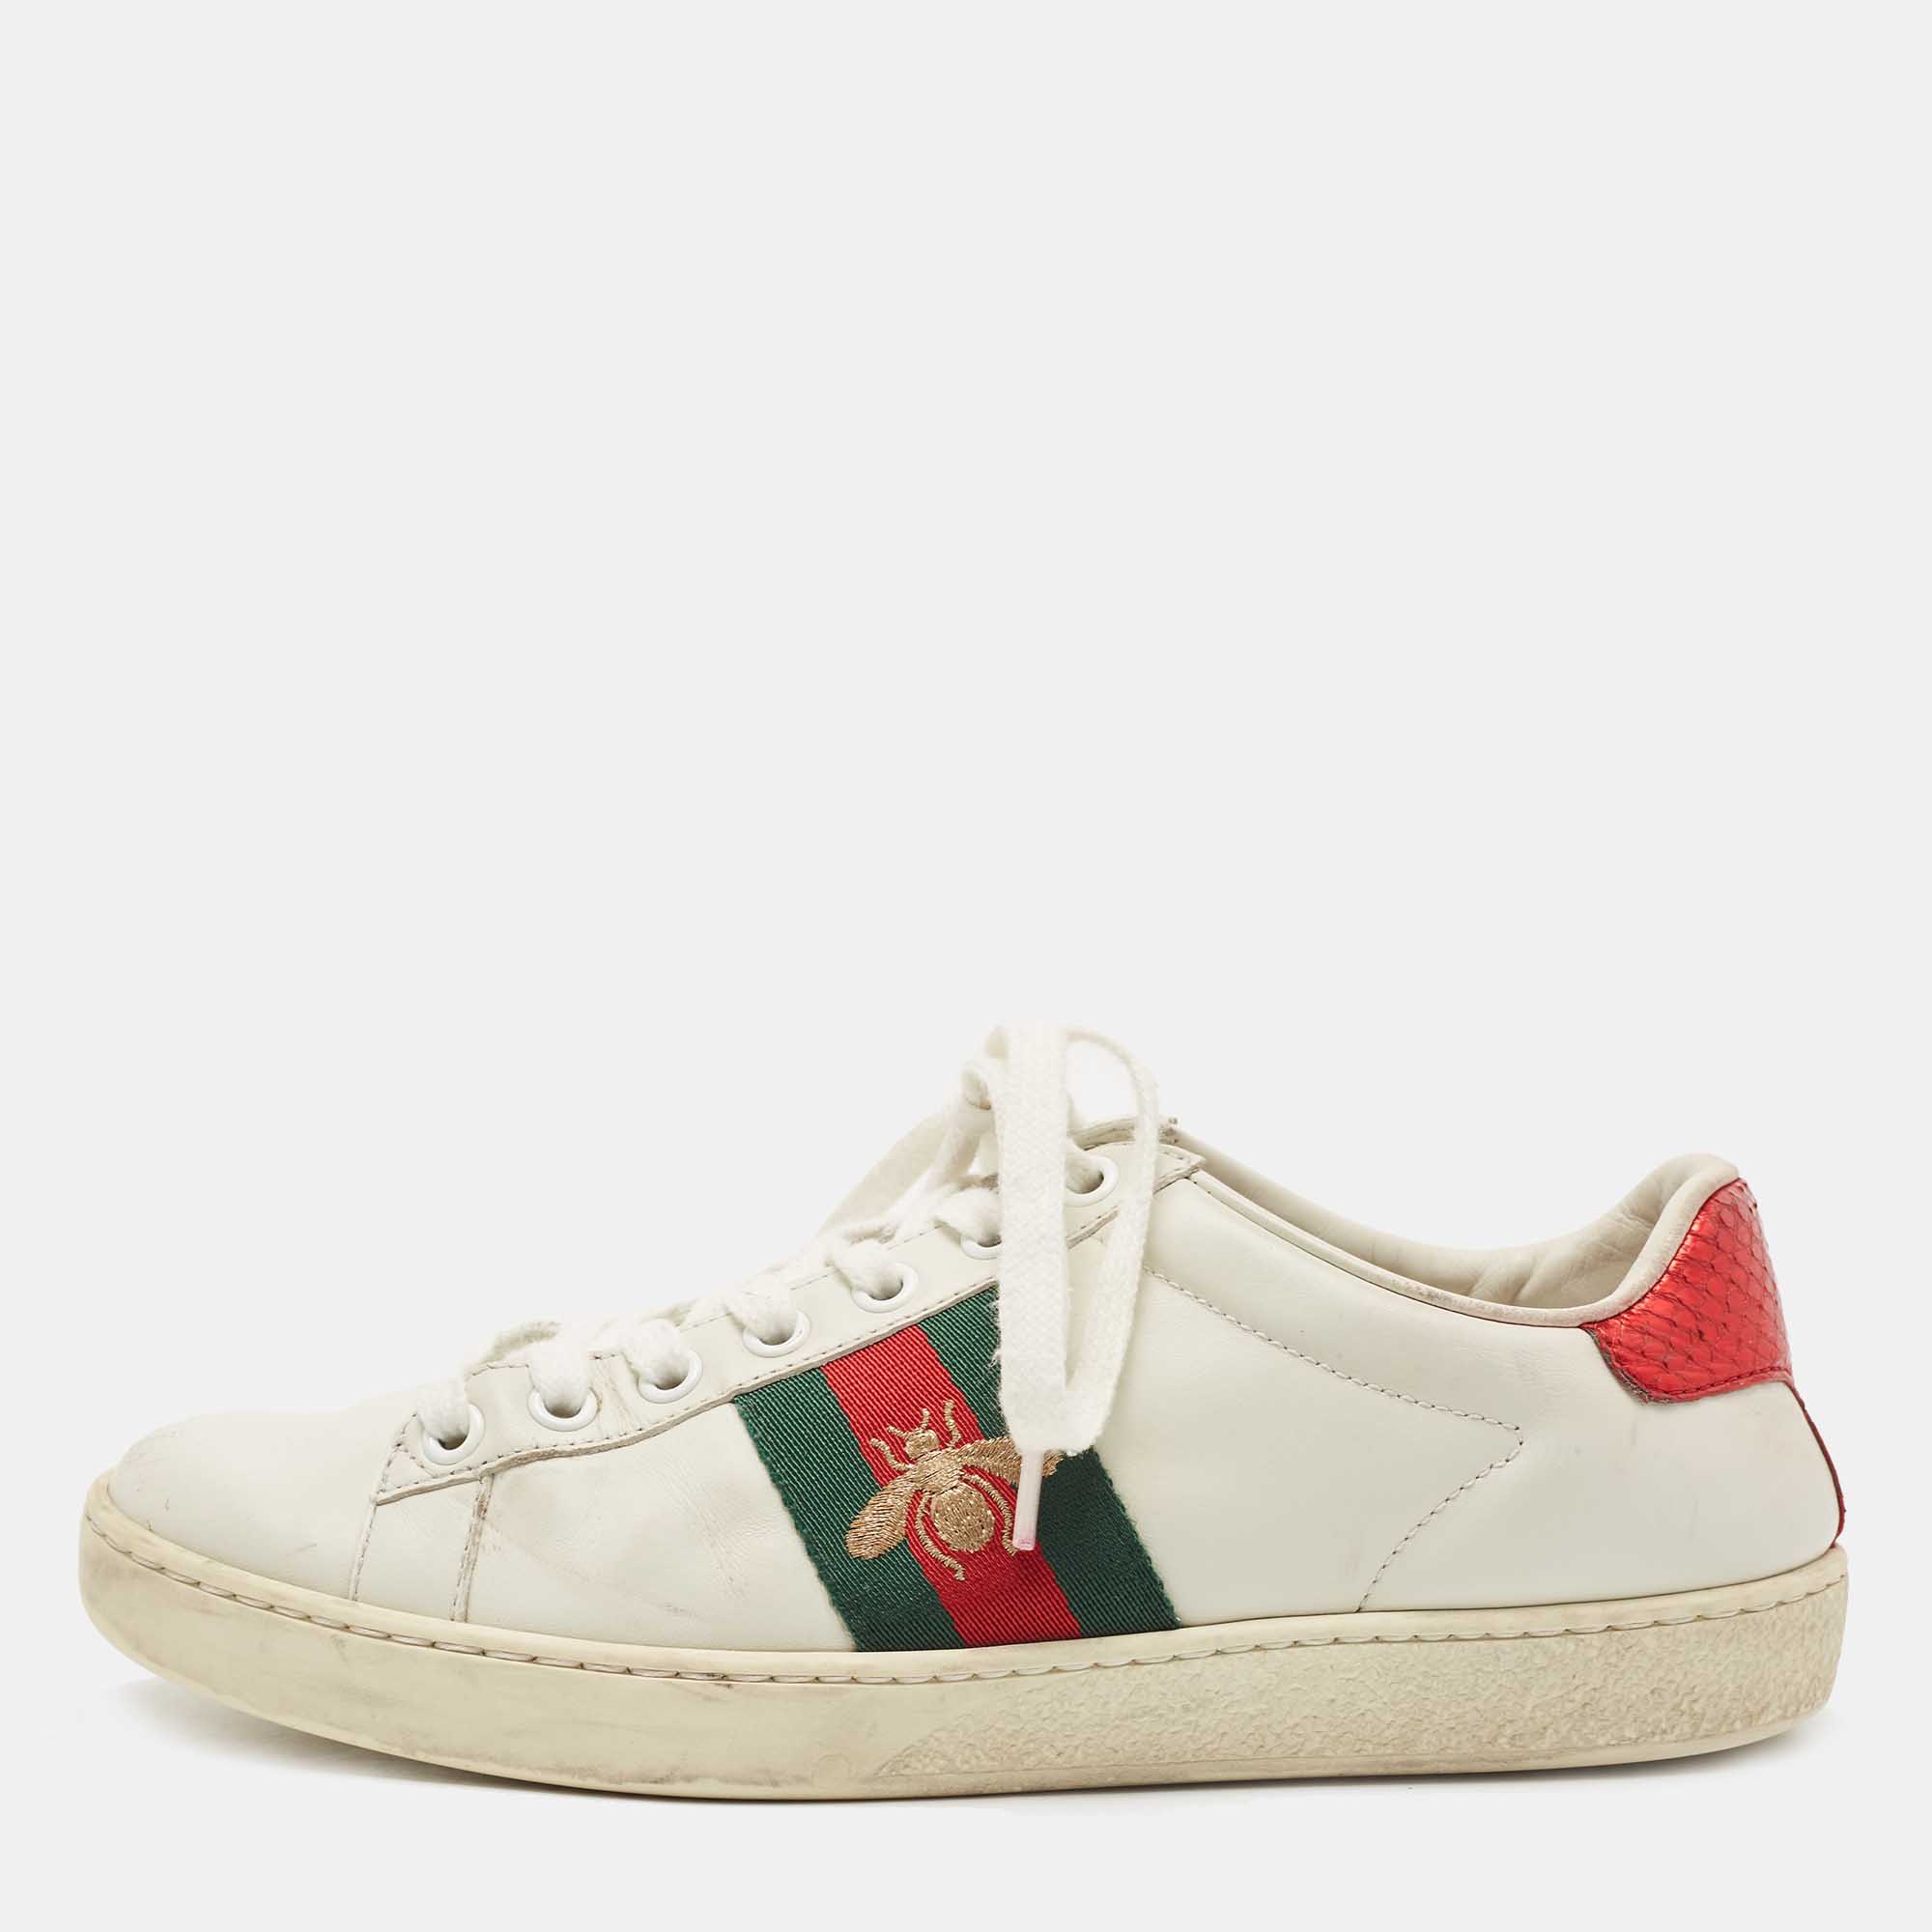 Gucci white leather bee embroidered ace sneakers size 35.5